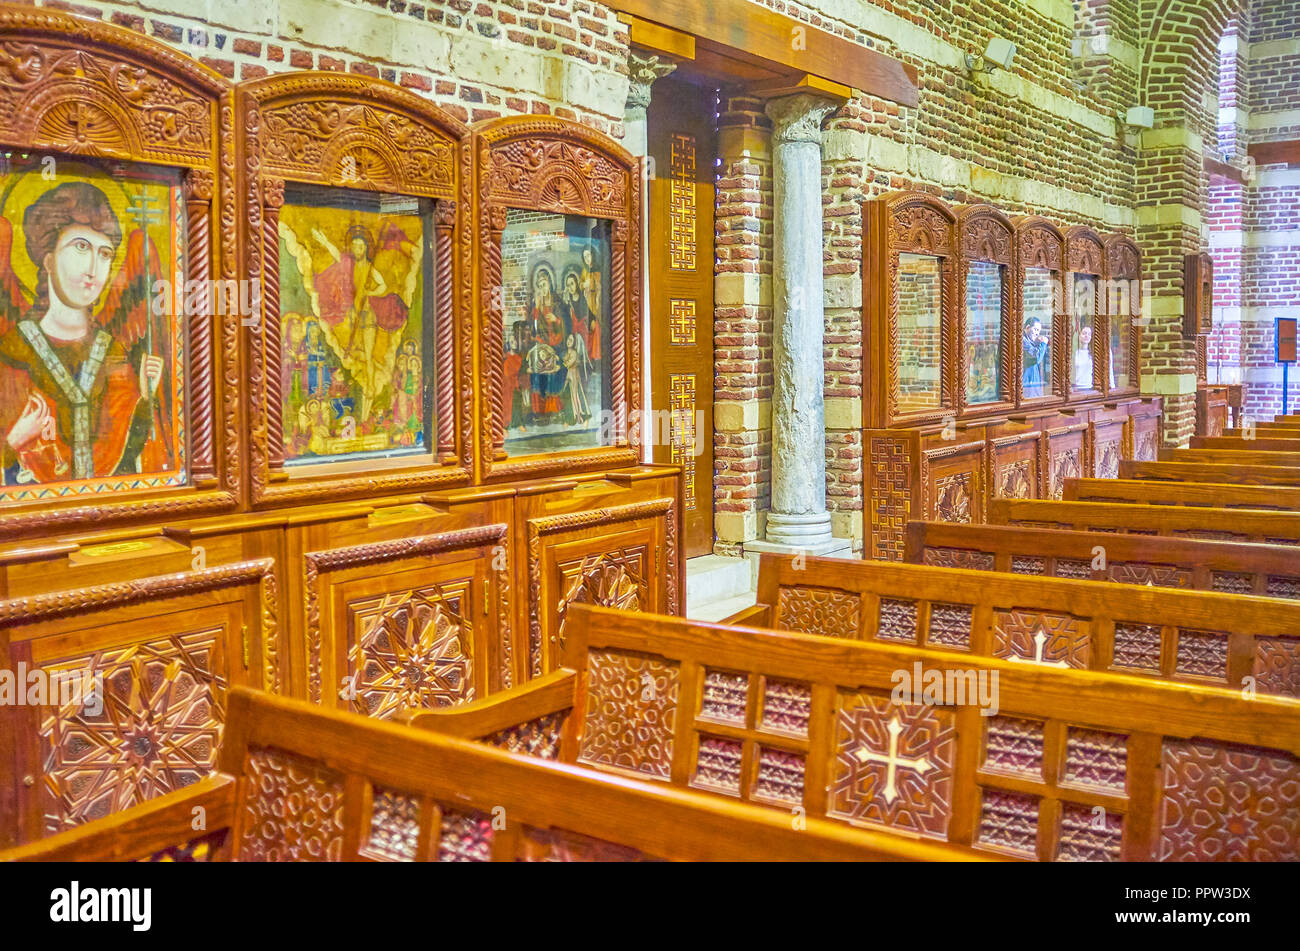 CAIRO, EGYPT - DECEMBER 23, 2017: The beautiful ancient Byzantine style icons in the prayer hall of St Barbara Church, on December 23 in Cairo. Stock Photo